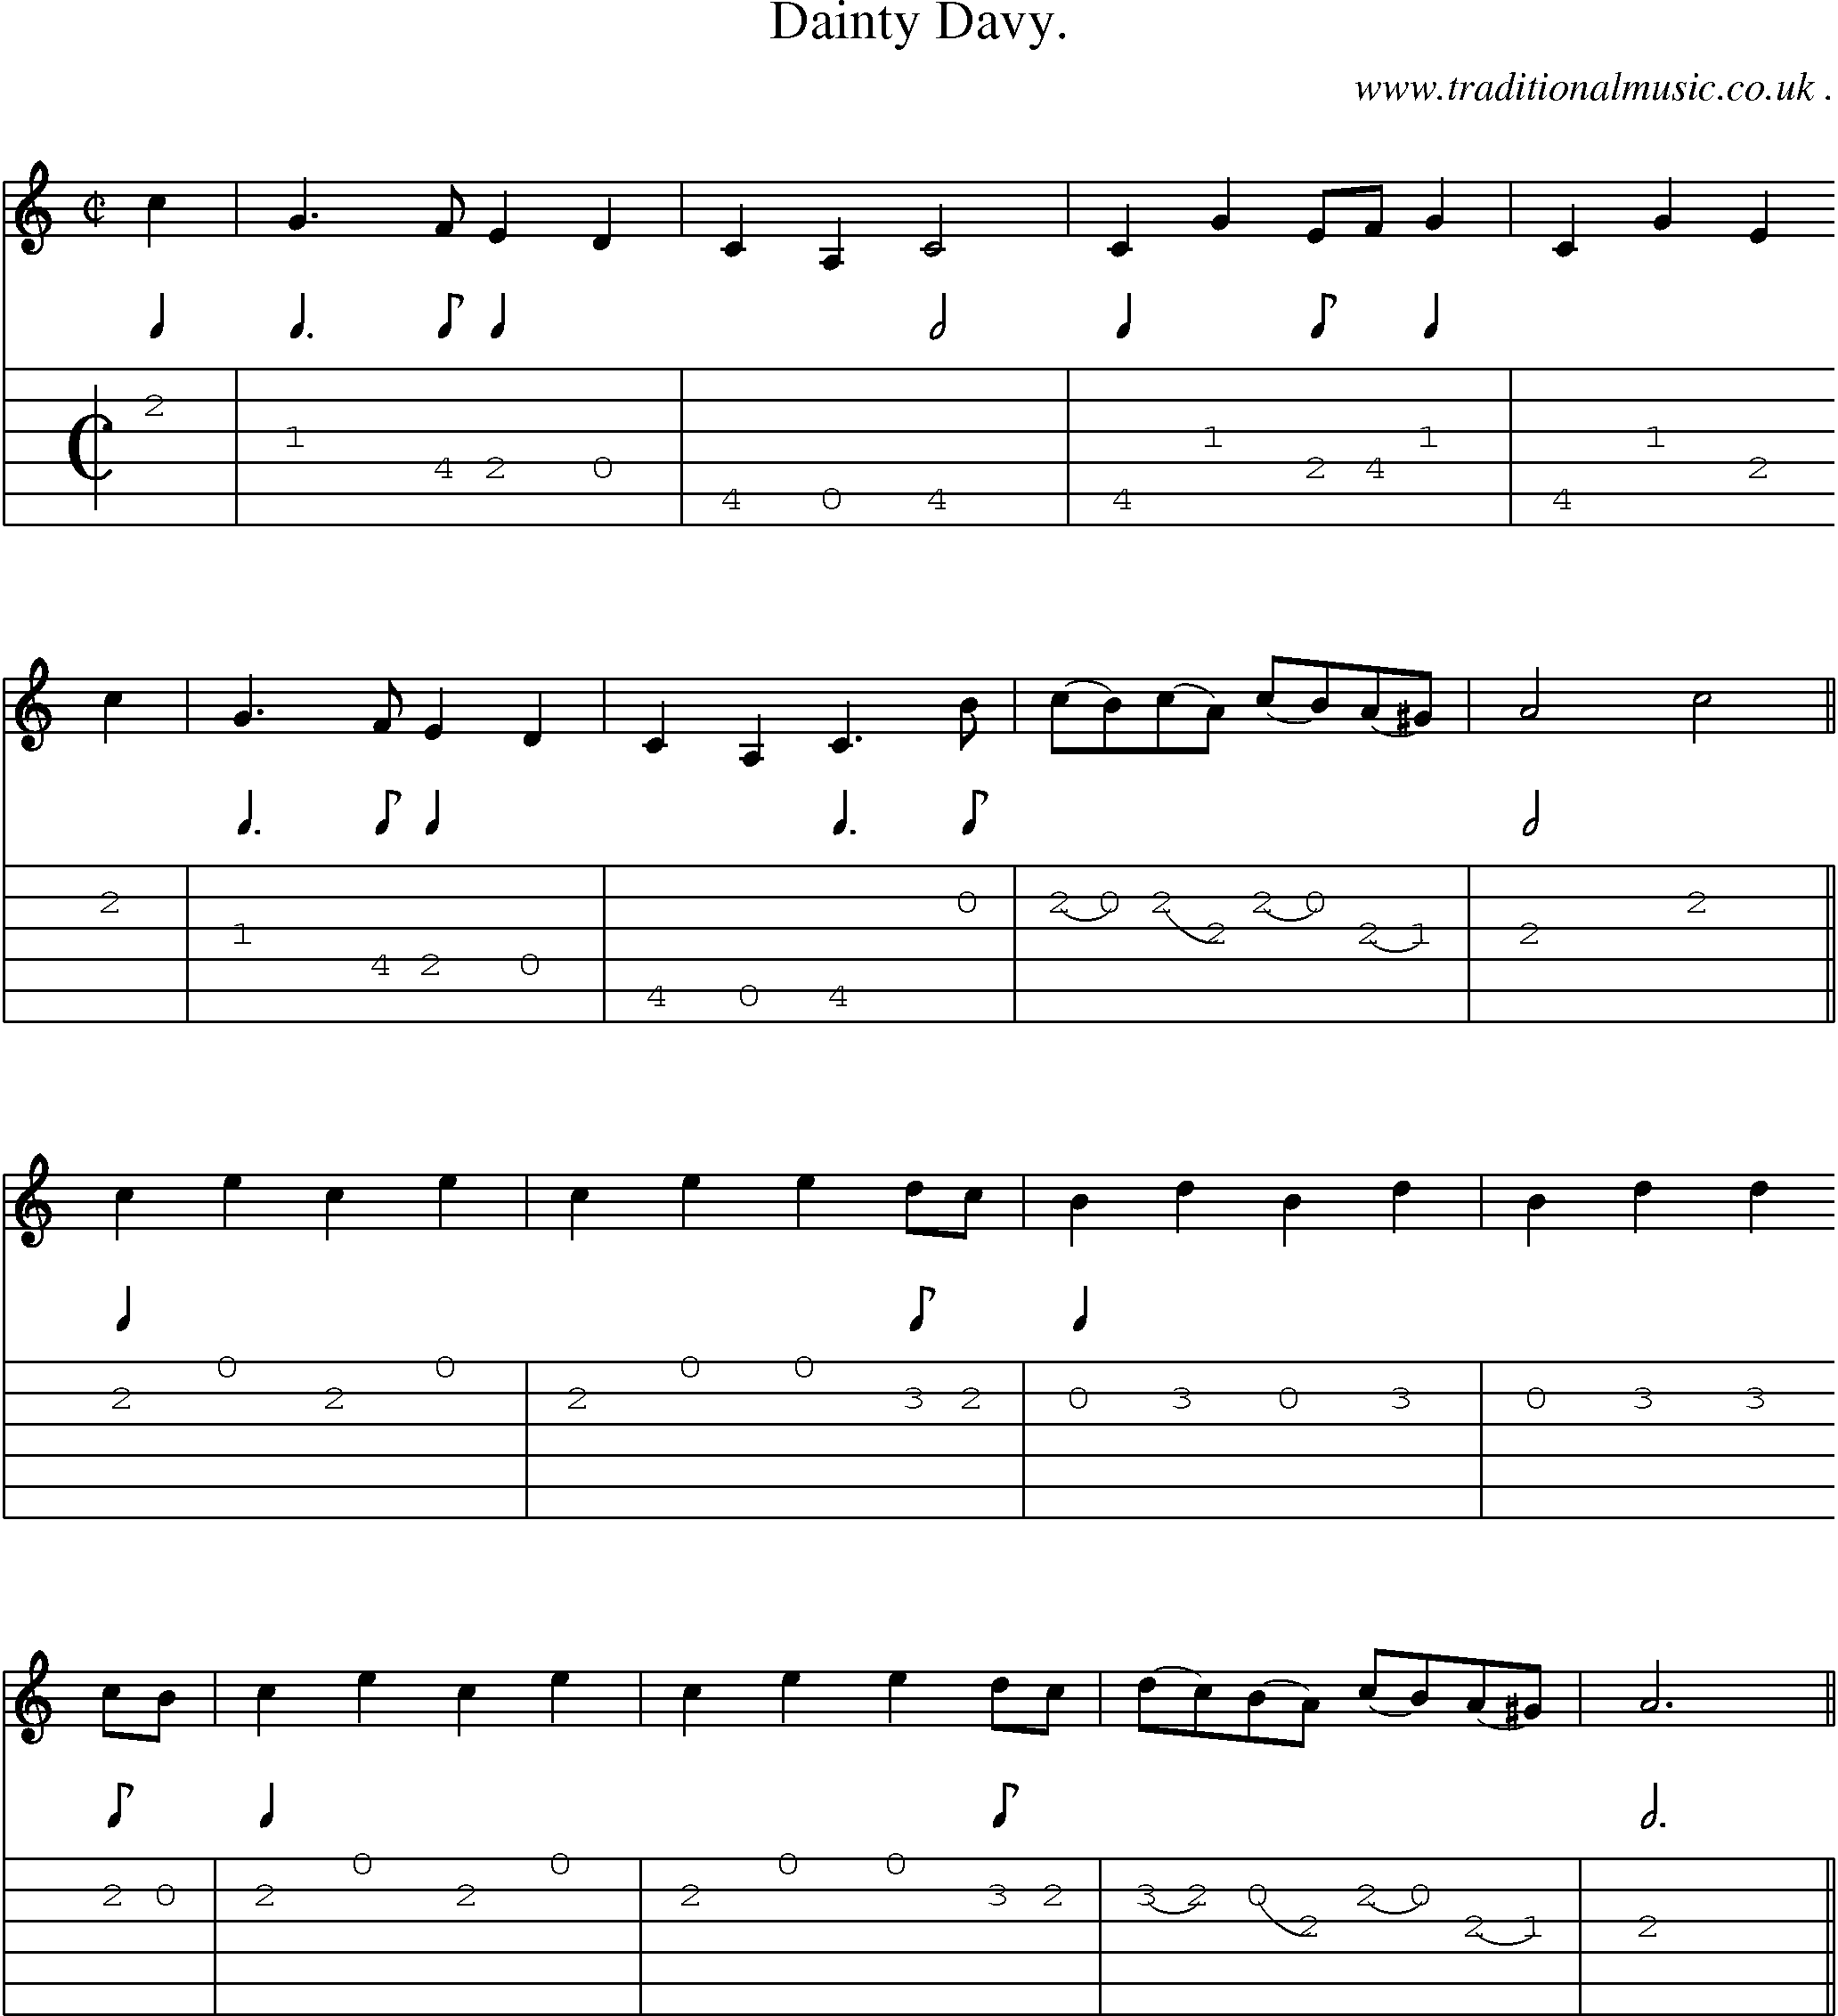 Sheet-Music and Guitar Tabs for Dainty Davy